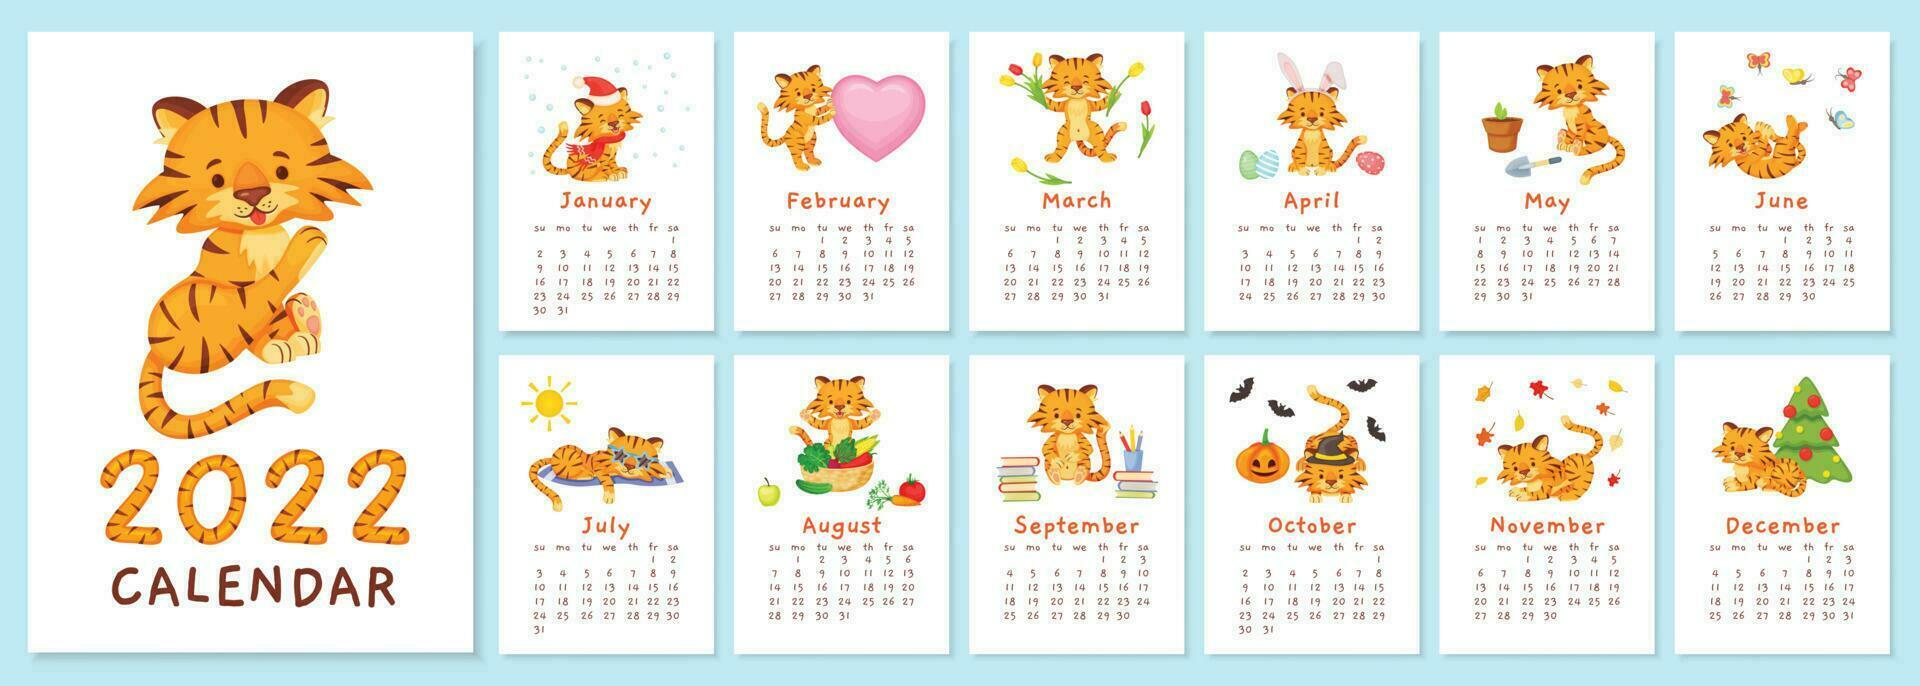 Cute tigers 2022 calendar, chinese new year tiger symbol. Cartoon happy baby animal characters in different months planner Vector template